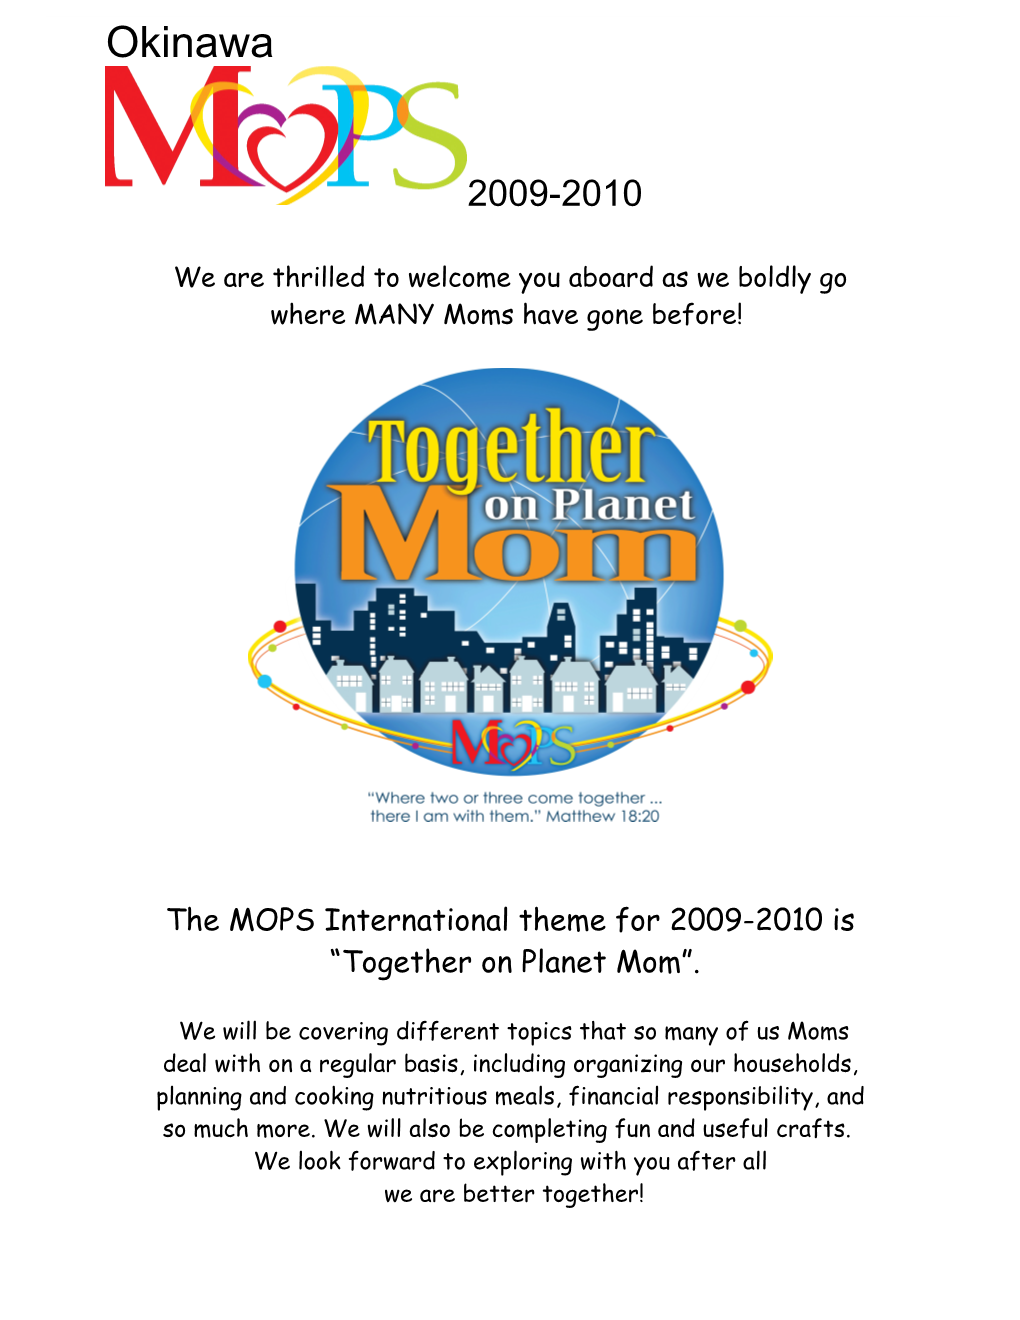 The MOPS International Theme for 2009-2010 Is